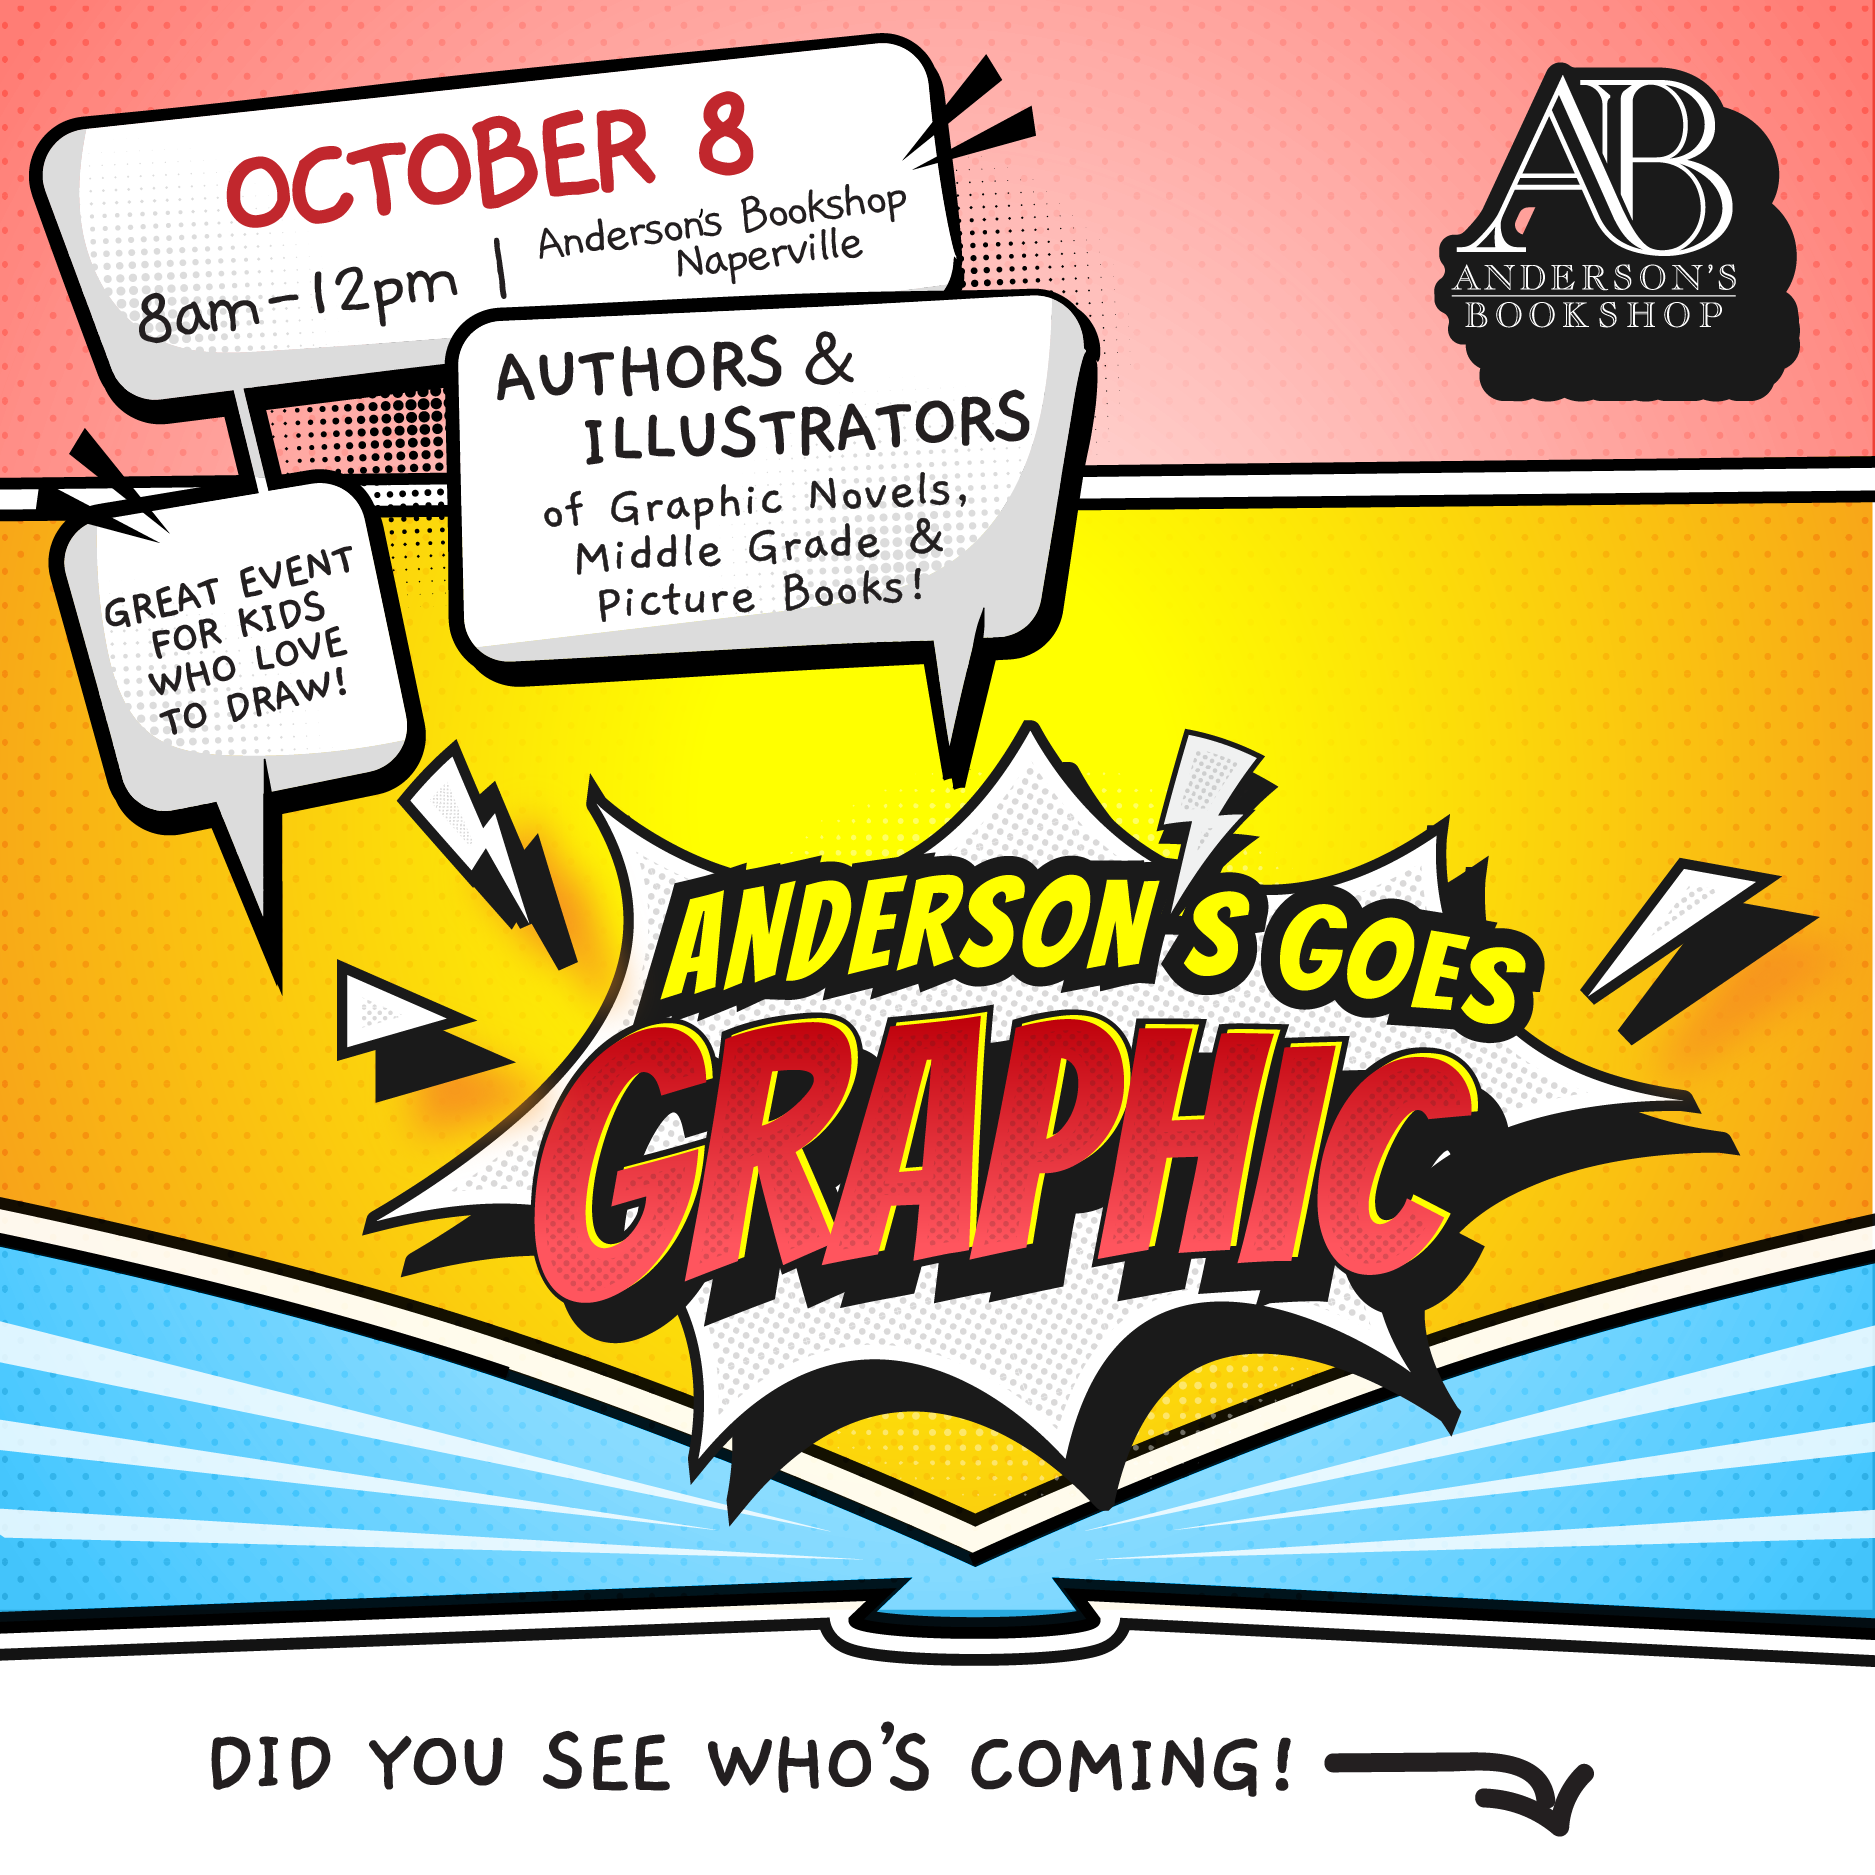 Anderson's Goes Graphic